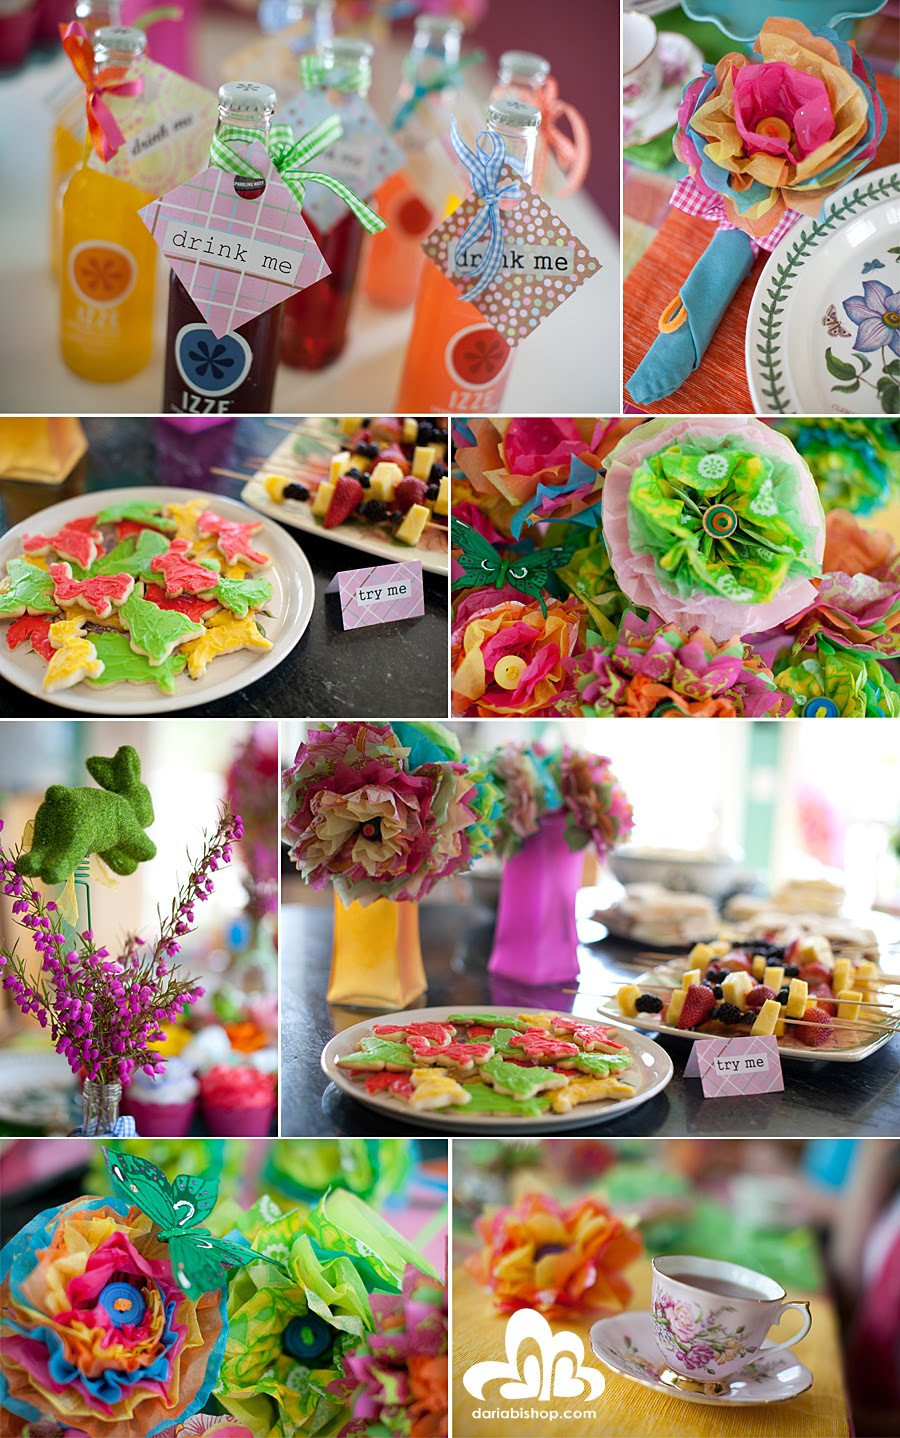 Mad Hatters Tea Party Ideas
 Simply Creative Insanity Mad Hatters Tea Party